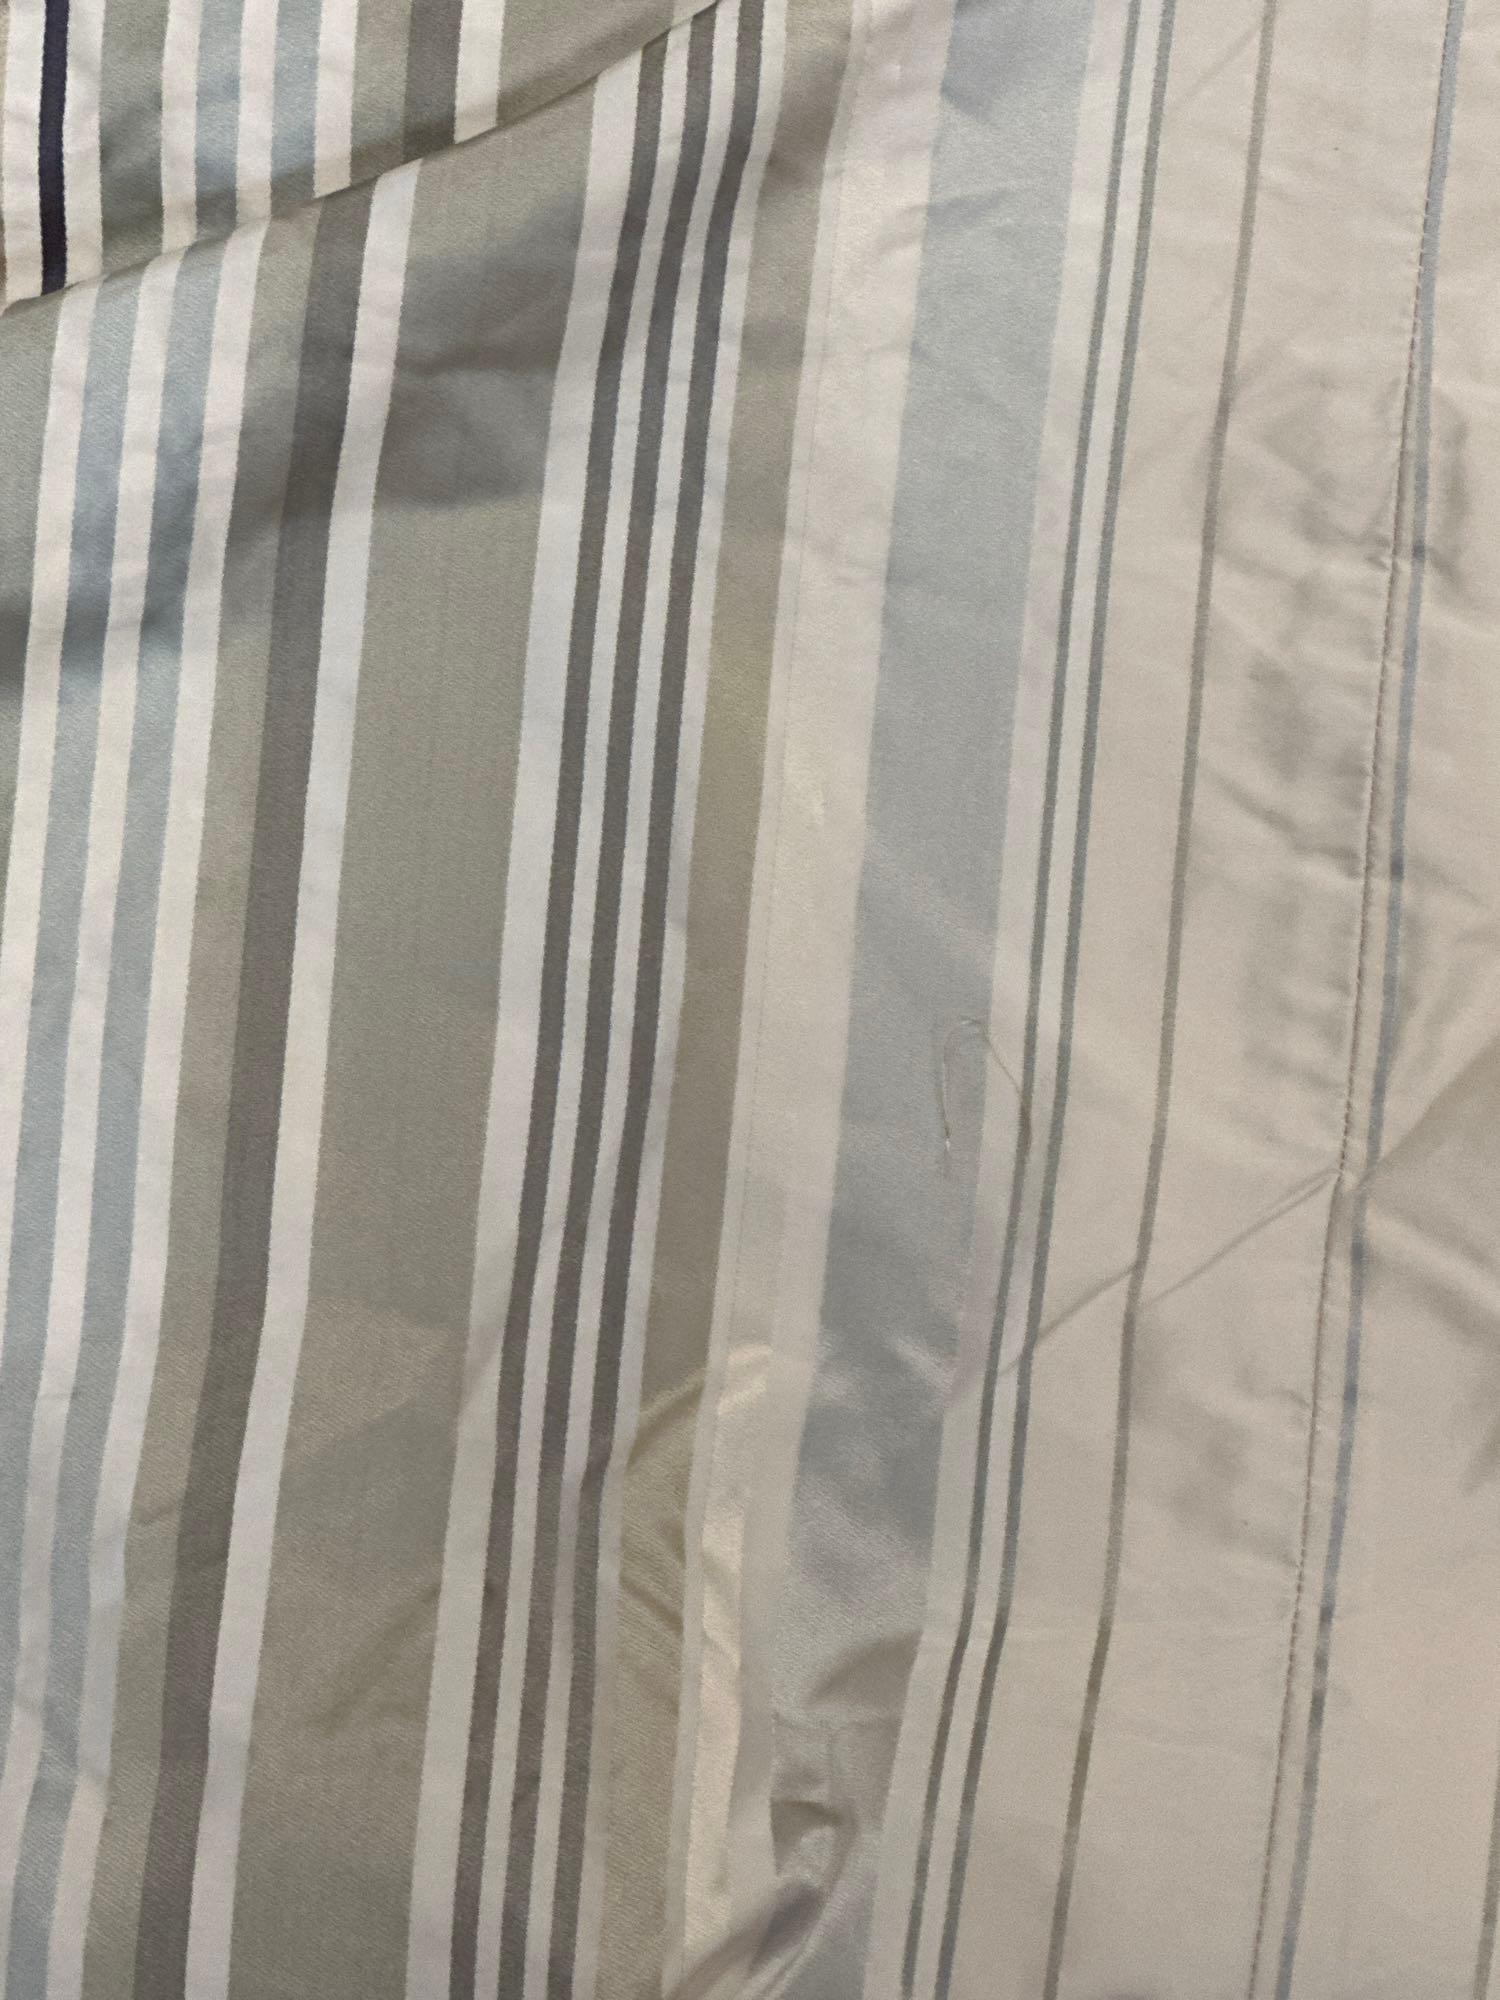 A Pair Of Striped Silk Show Curtains With Tasselled Edging 217 Wide x 251 (Shortest) 340 (Longest) - Image 3 of 4